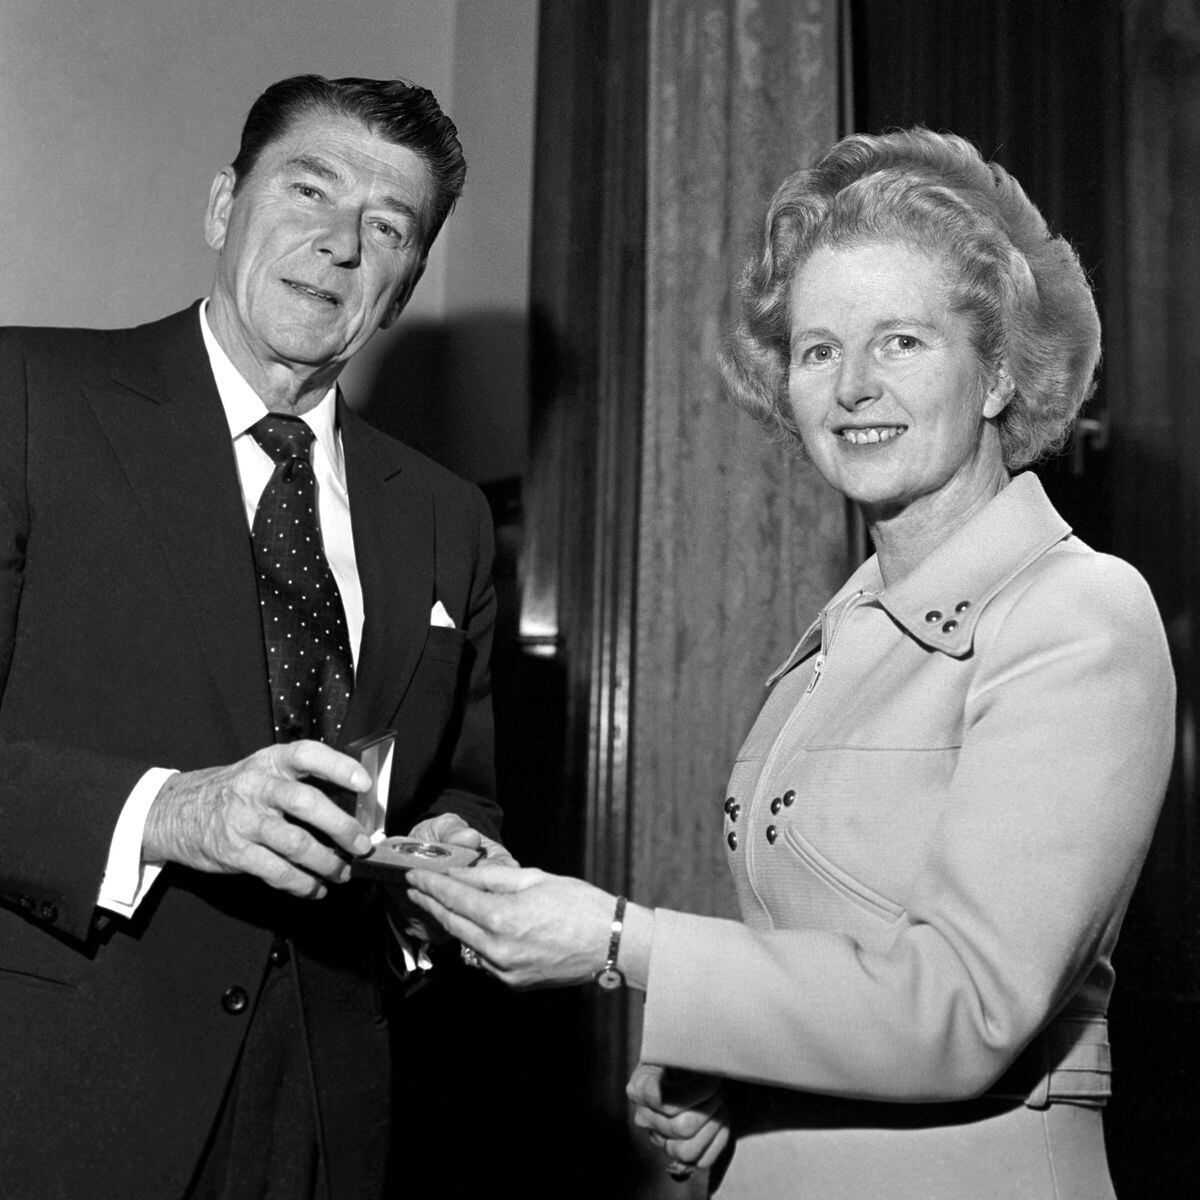 Ronald Reagan with Margaret Thatcher, who brought variants of neoliberalism to the Western world. 